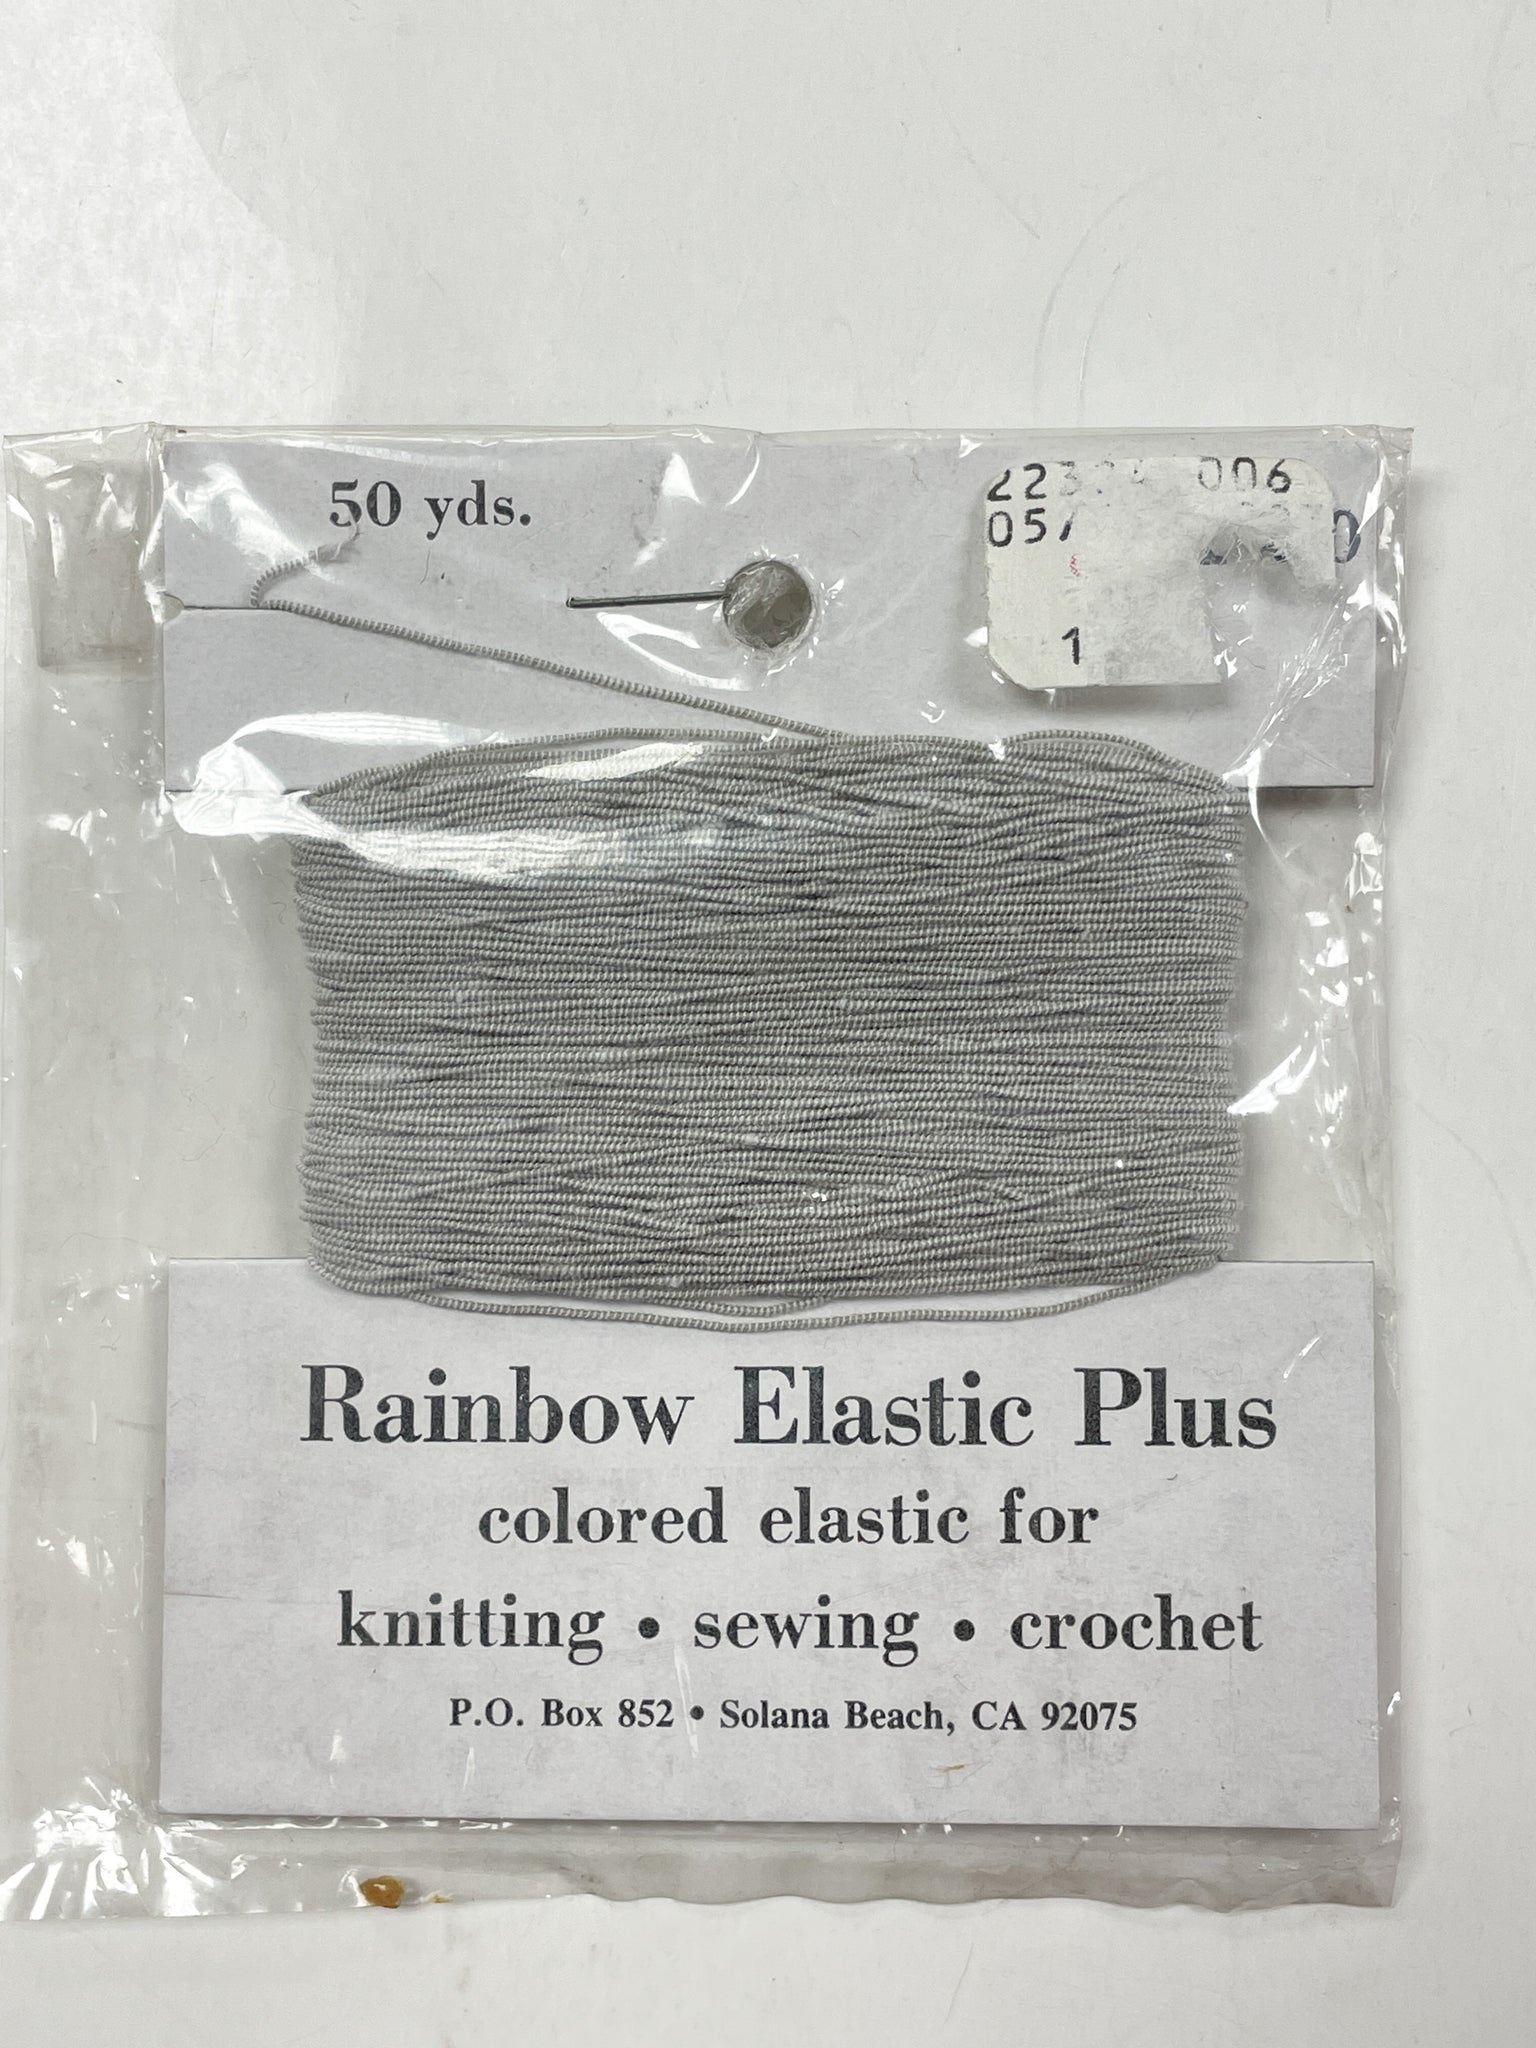 50 YD Colored Elastic for Knitting, Sewing or Crocheting: Gray